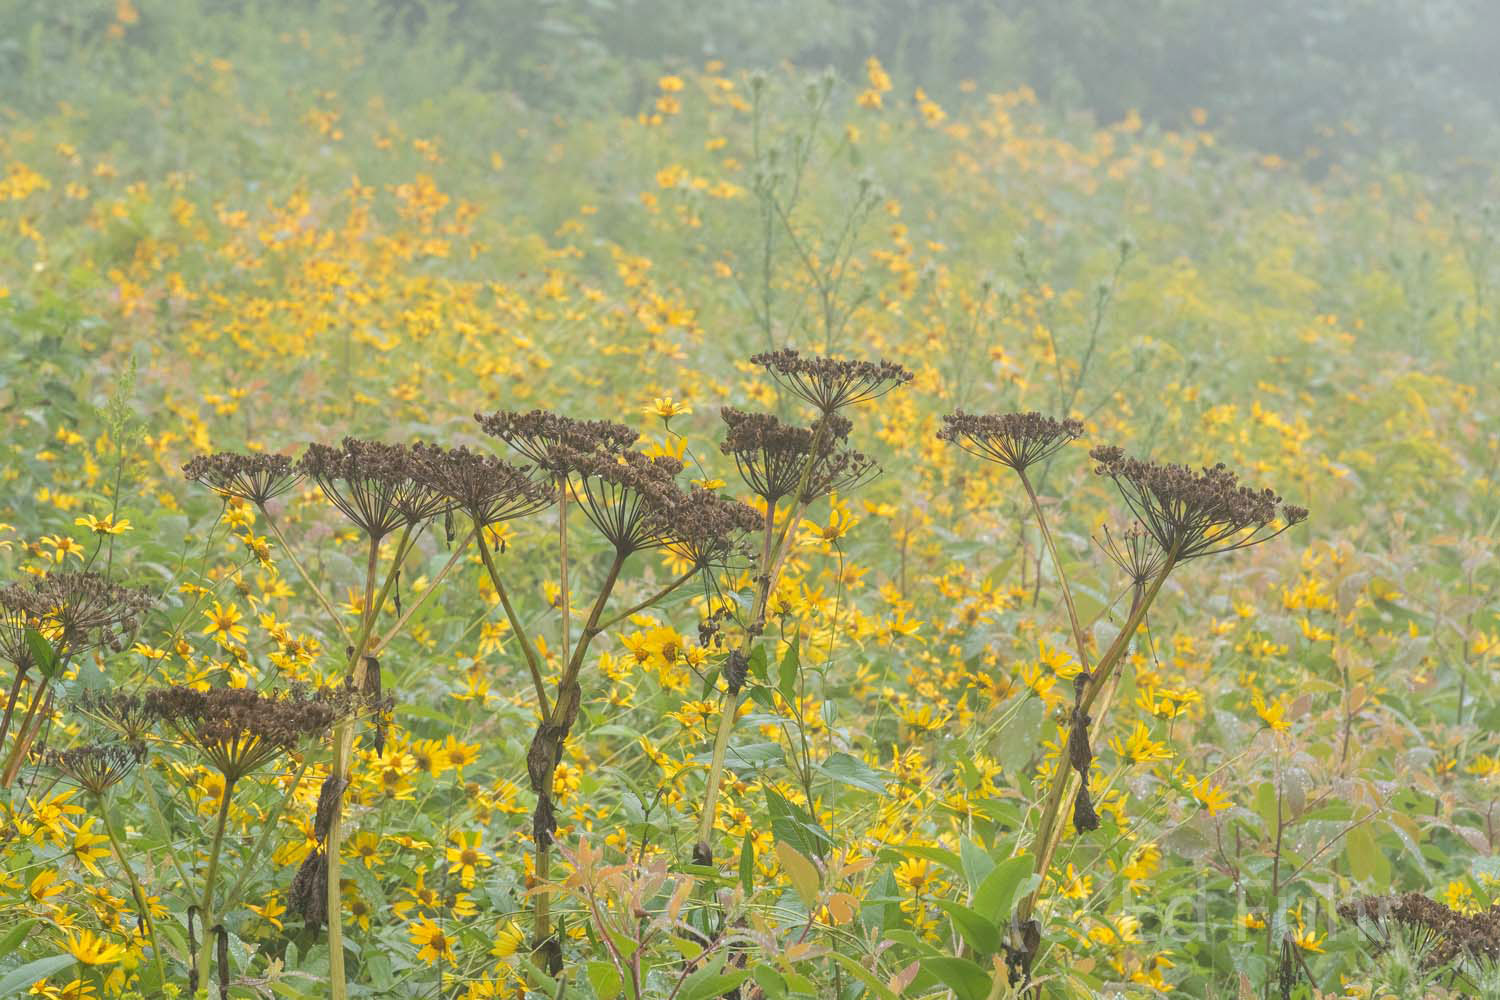 The dried seed heads of cow parsnip rise above a field of black eyed susans and sunflowers.